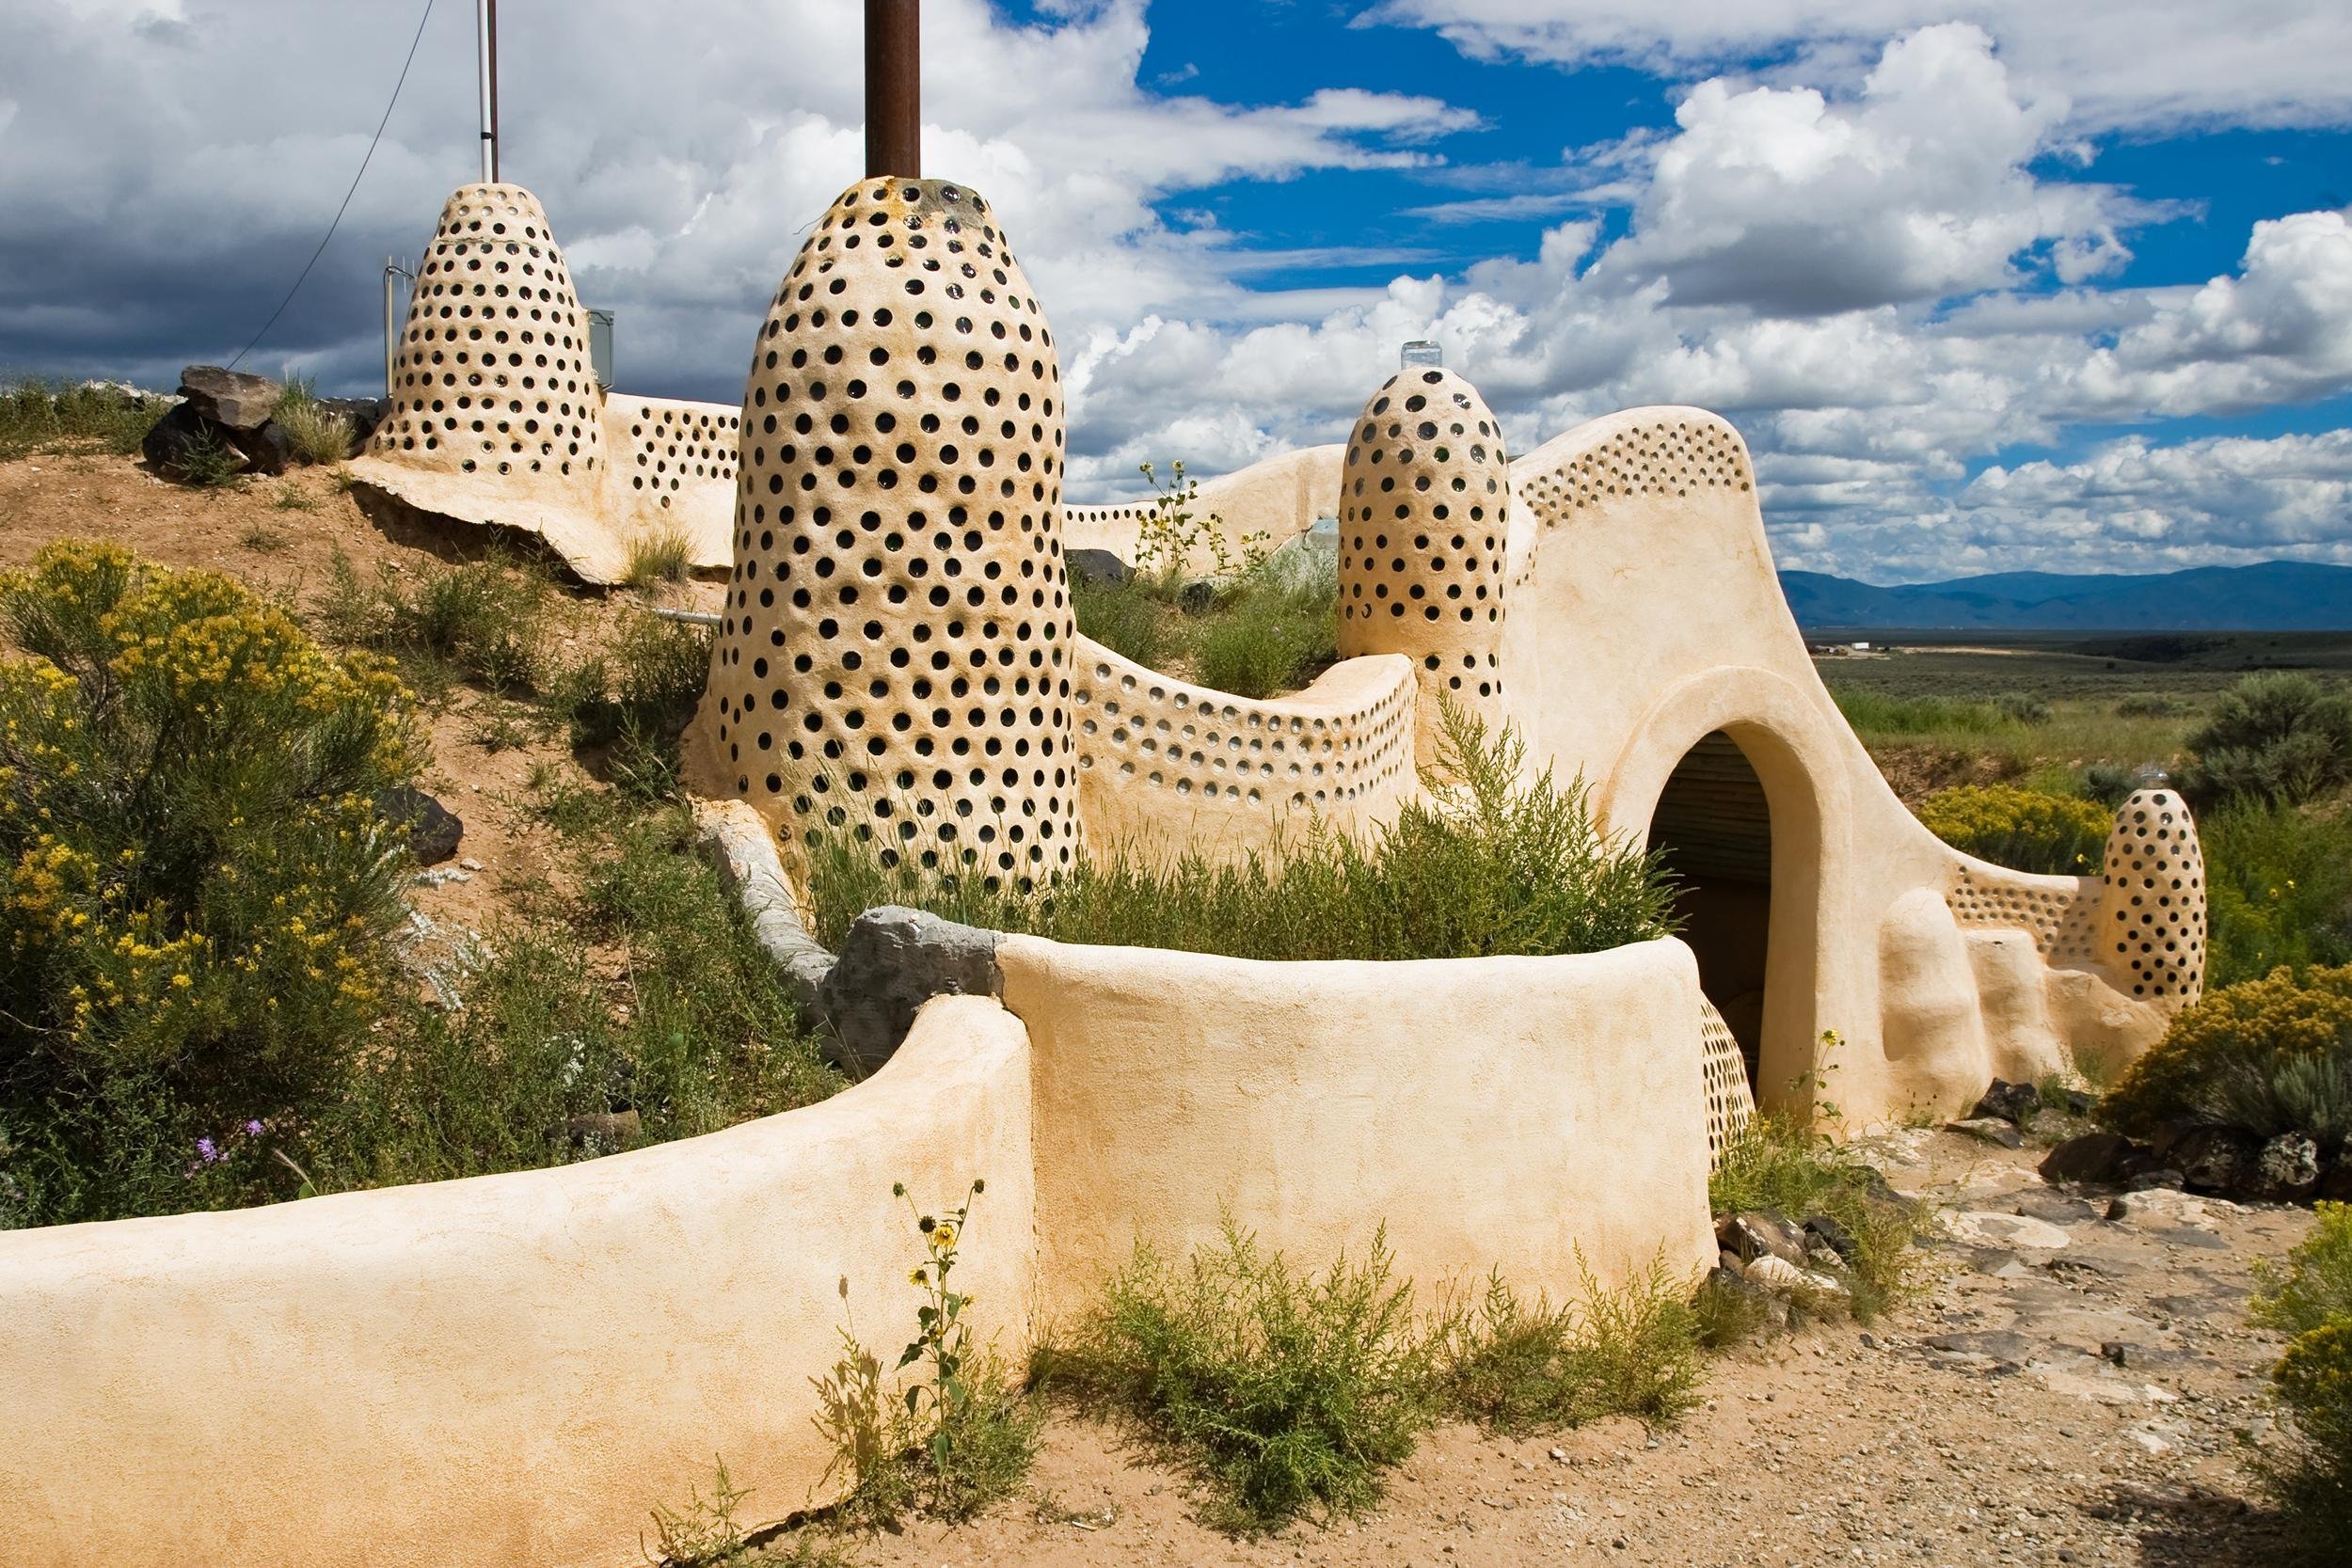 <p>Taos is home to unique and eerily beautiful "biotecture" edifices called Earthships. The self-sustaining and built-by-hand structures are marked with impressive mosaics, stained-glass windows, and architecture unlike most anywhere else. </p>